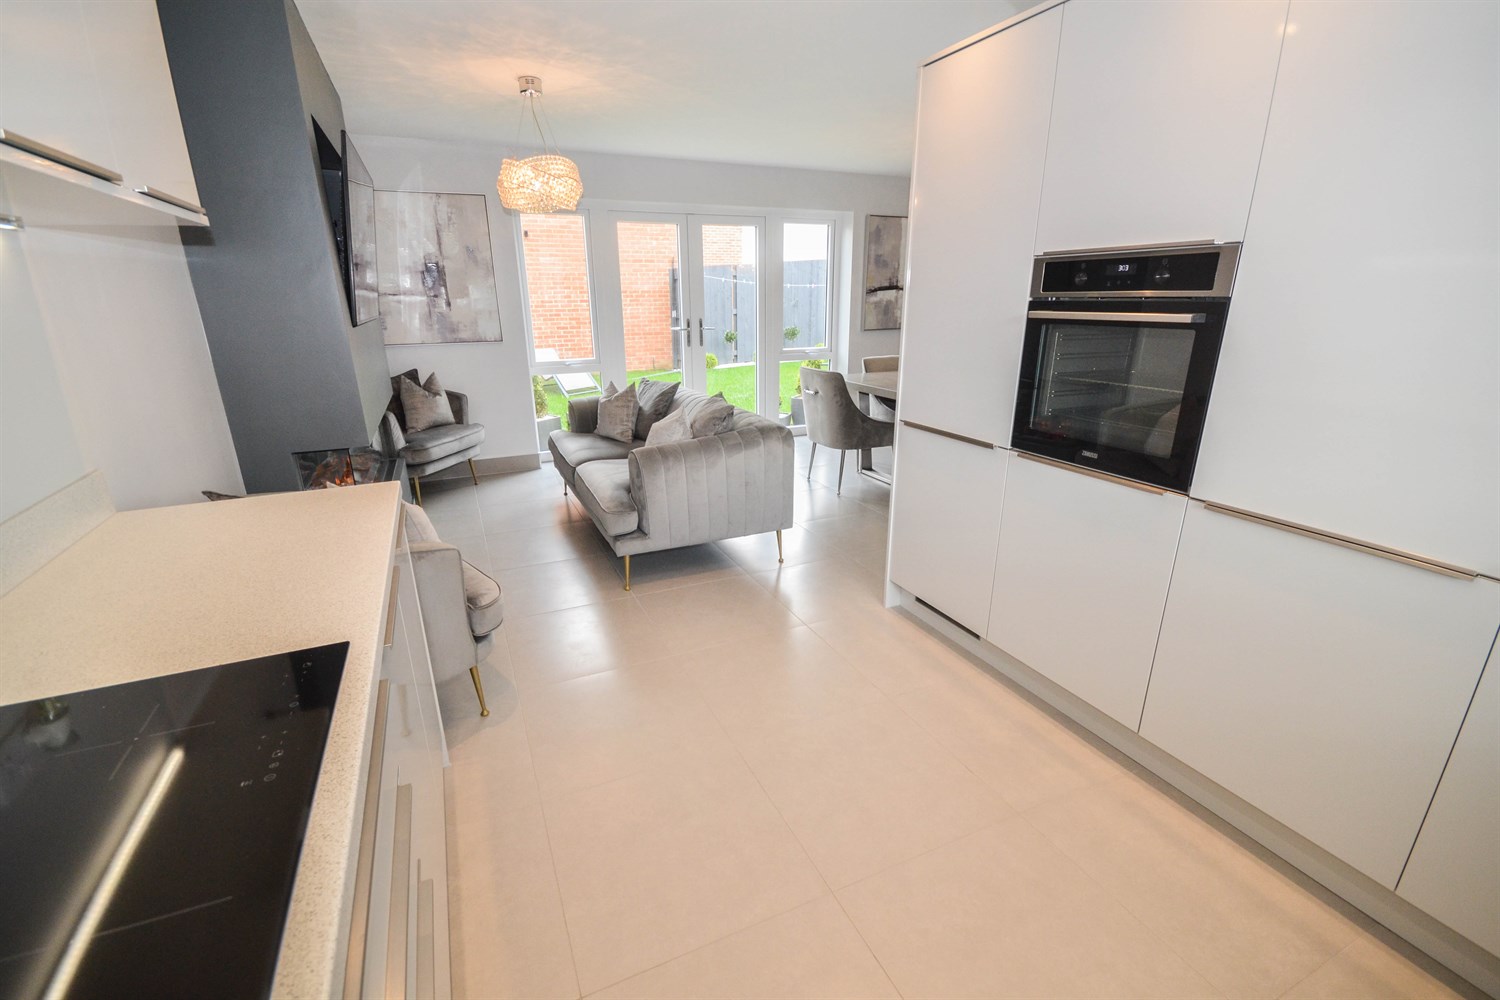 4 bed detached house for sale in Danmark Way, Sunderland  - Property Image 7